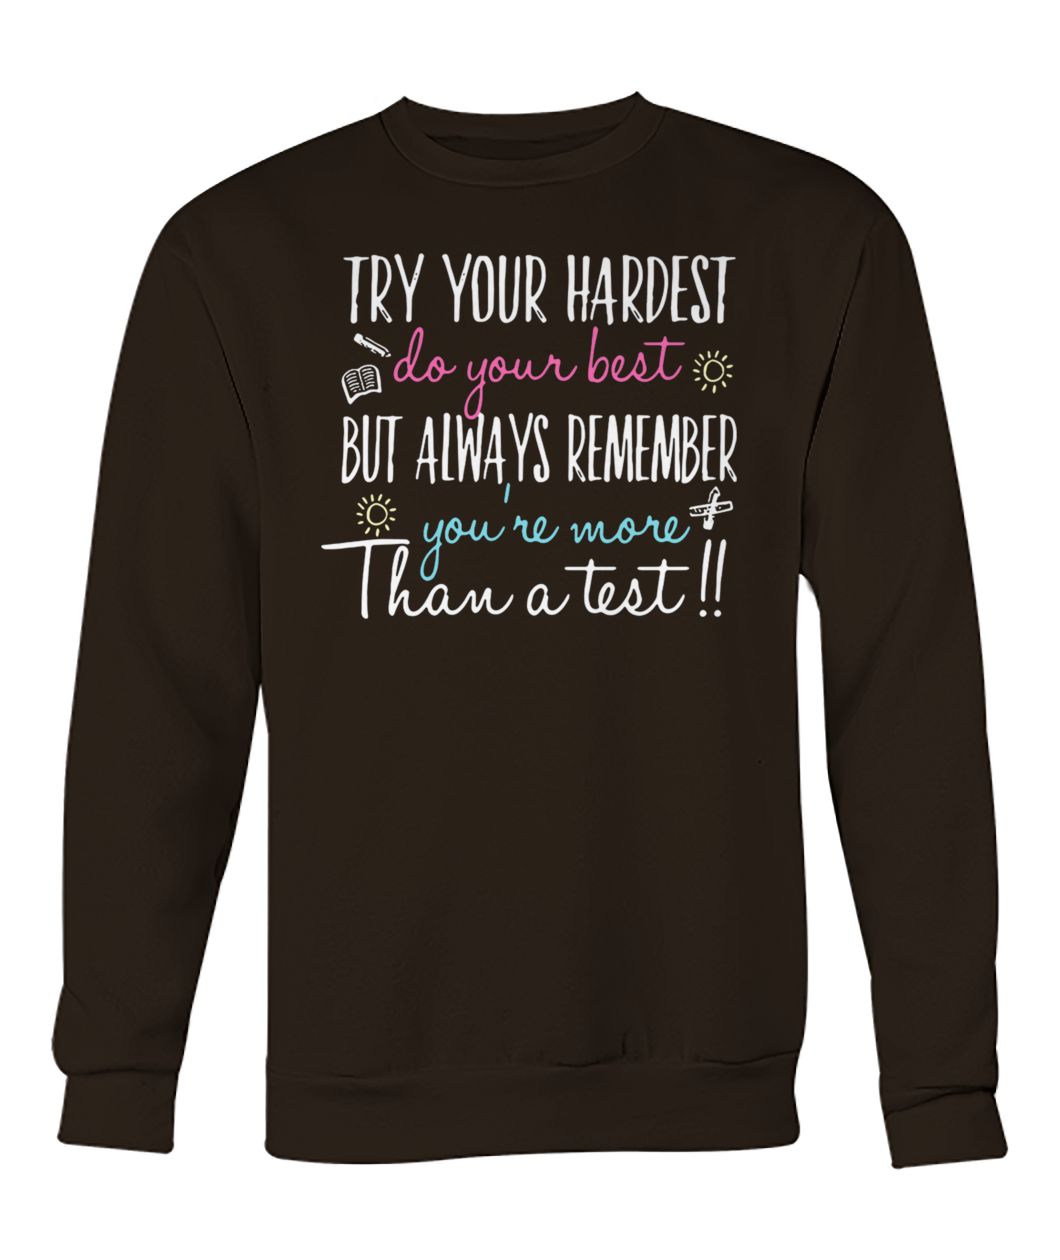 Try your hardest do your best but always remember you're more than a test crew neck sweatshirt